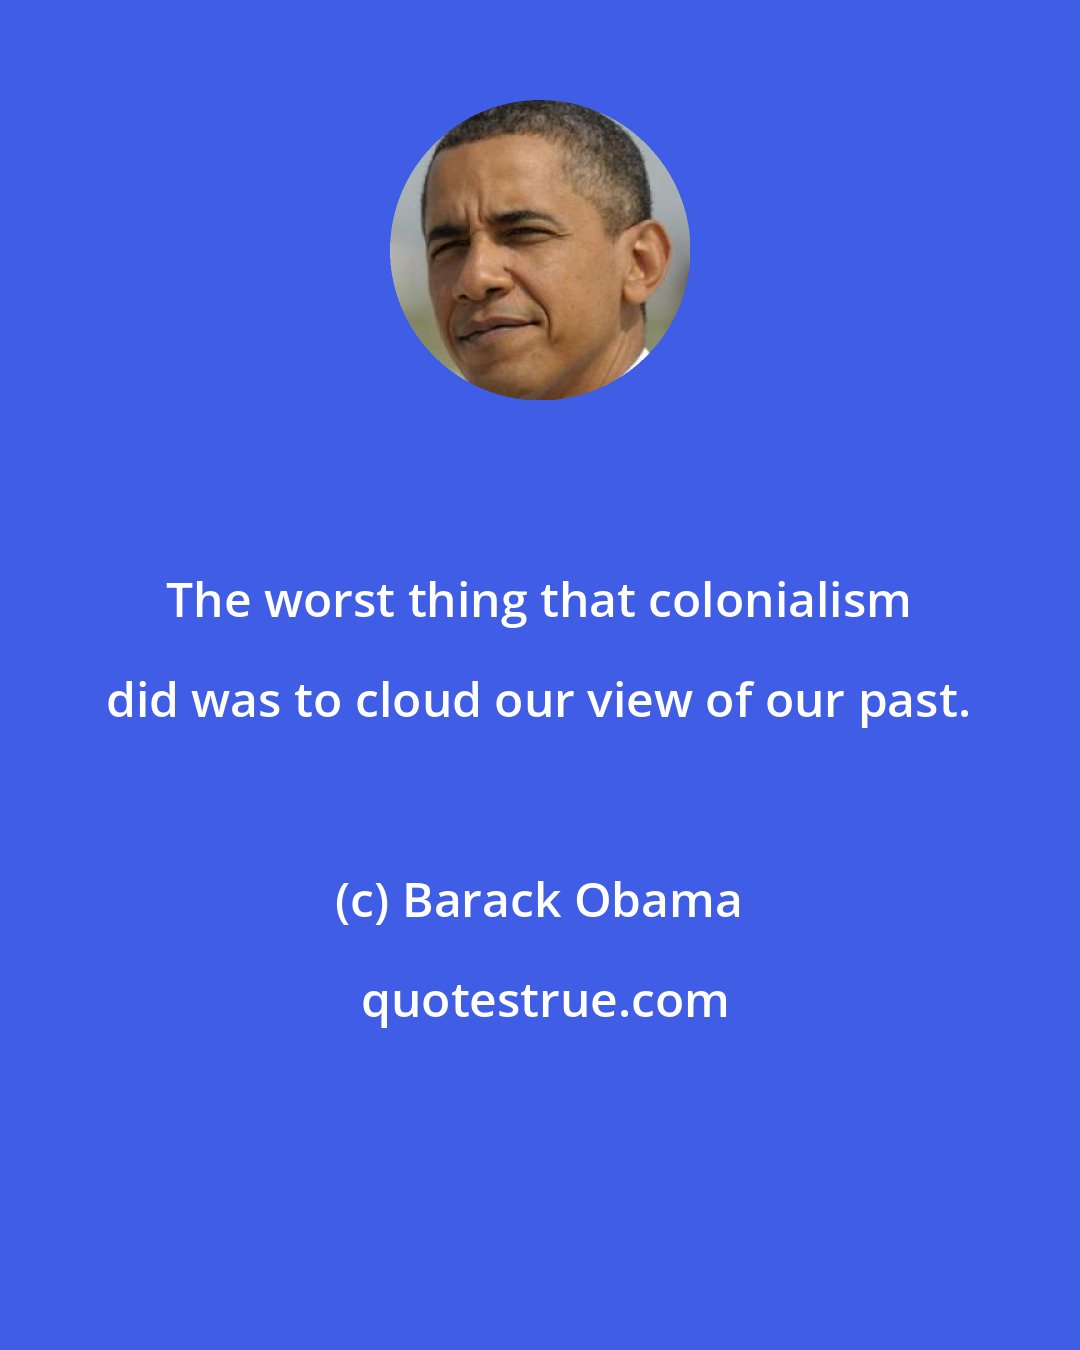 Barack Obama: The worst thing that colonialism did was to cloud our view of our past.